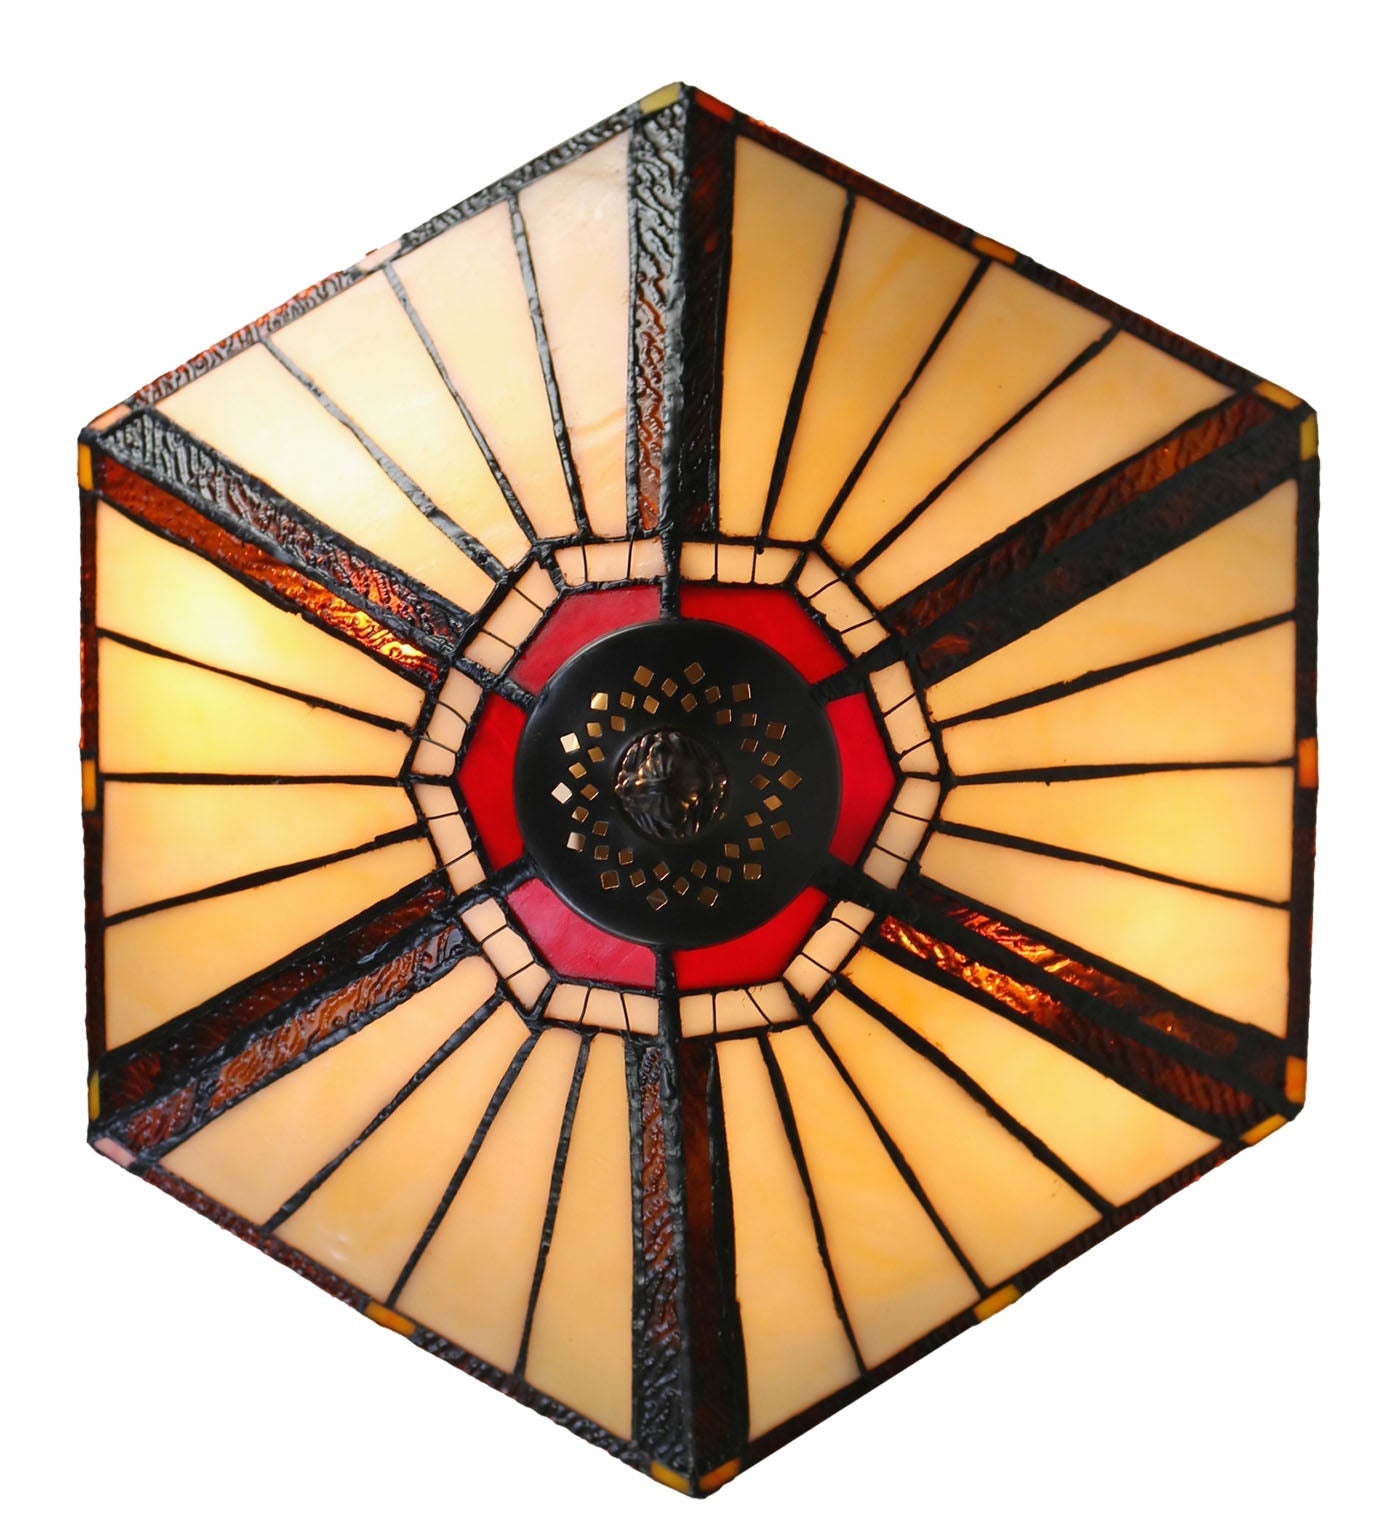 Hexagon Shade Stained Glass with Intricate Filigree Accent Tiffany Pendant Light